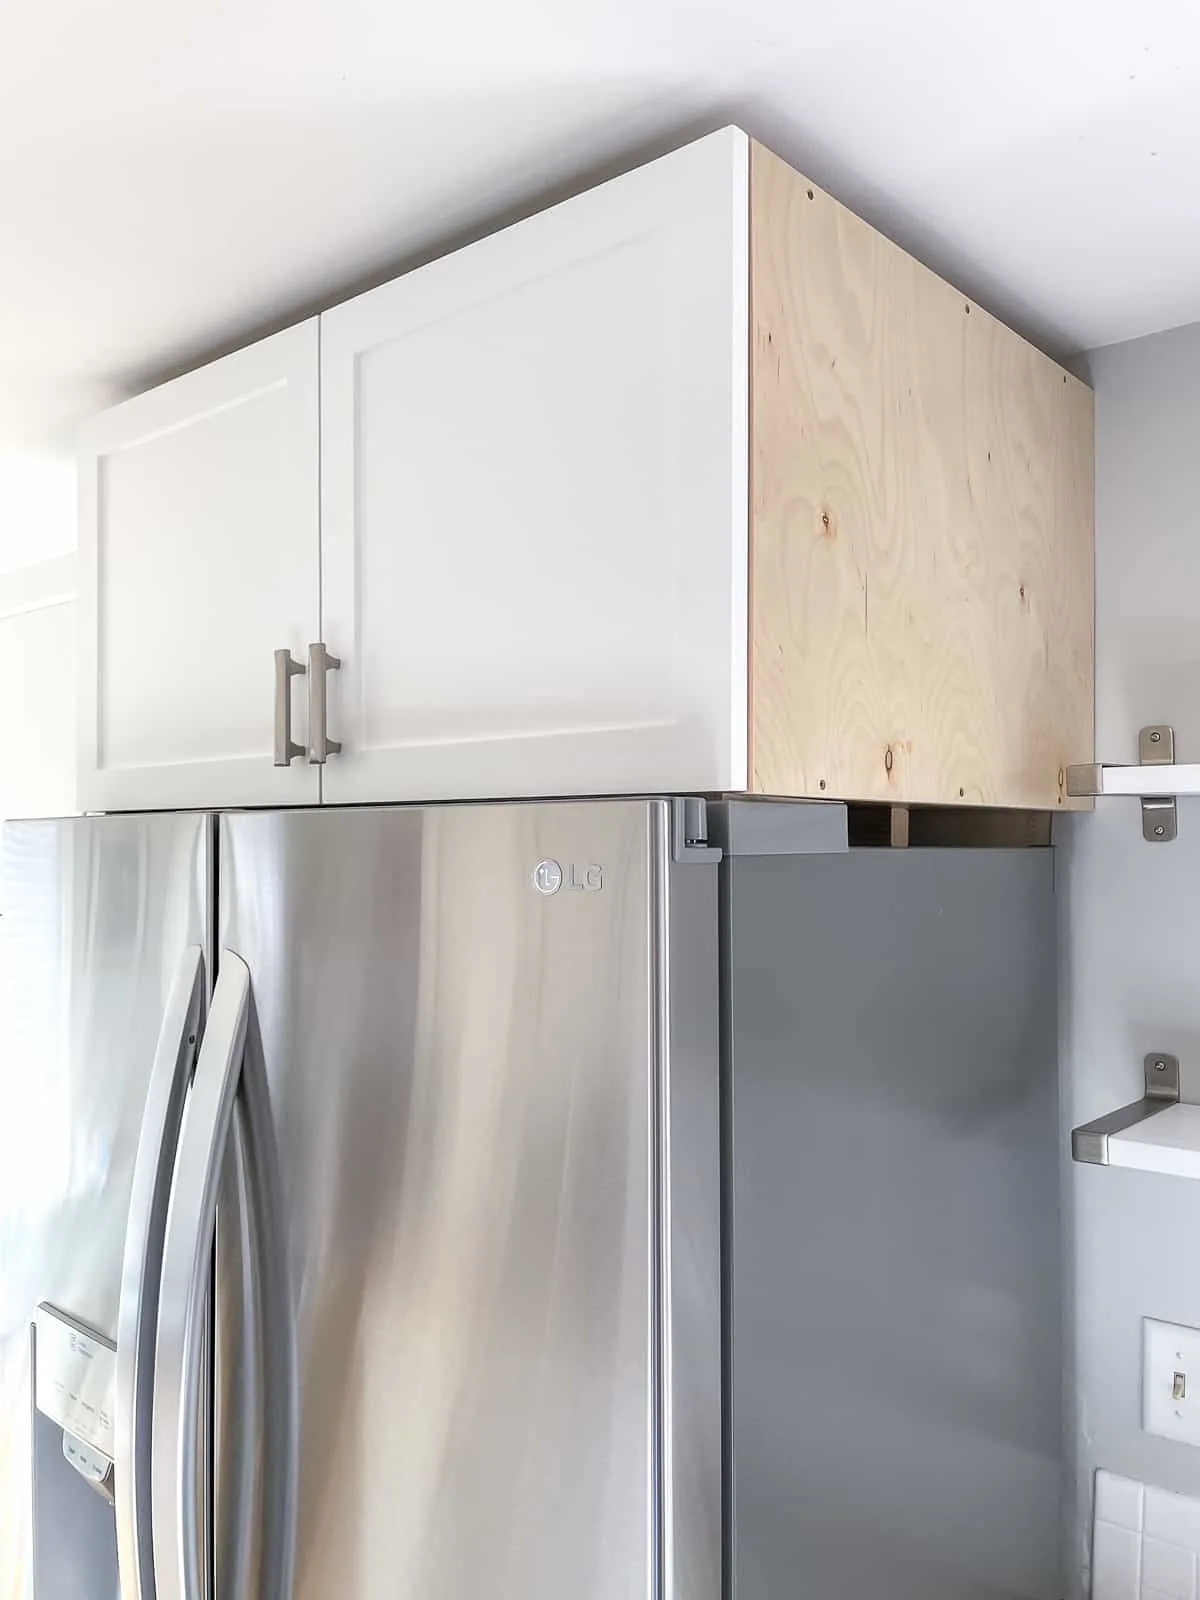 How to Achieve the Look of a Counter-Depth Fridge Without Buying a New Unit